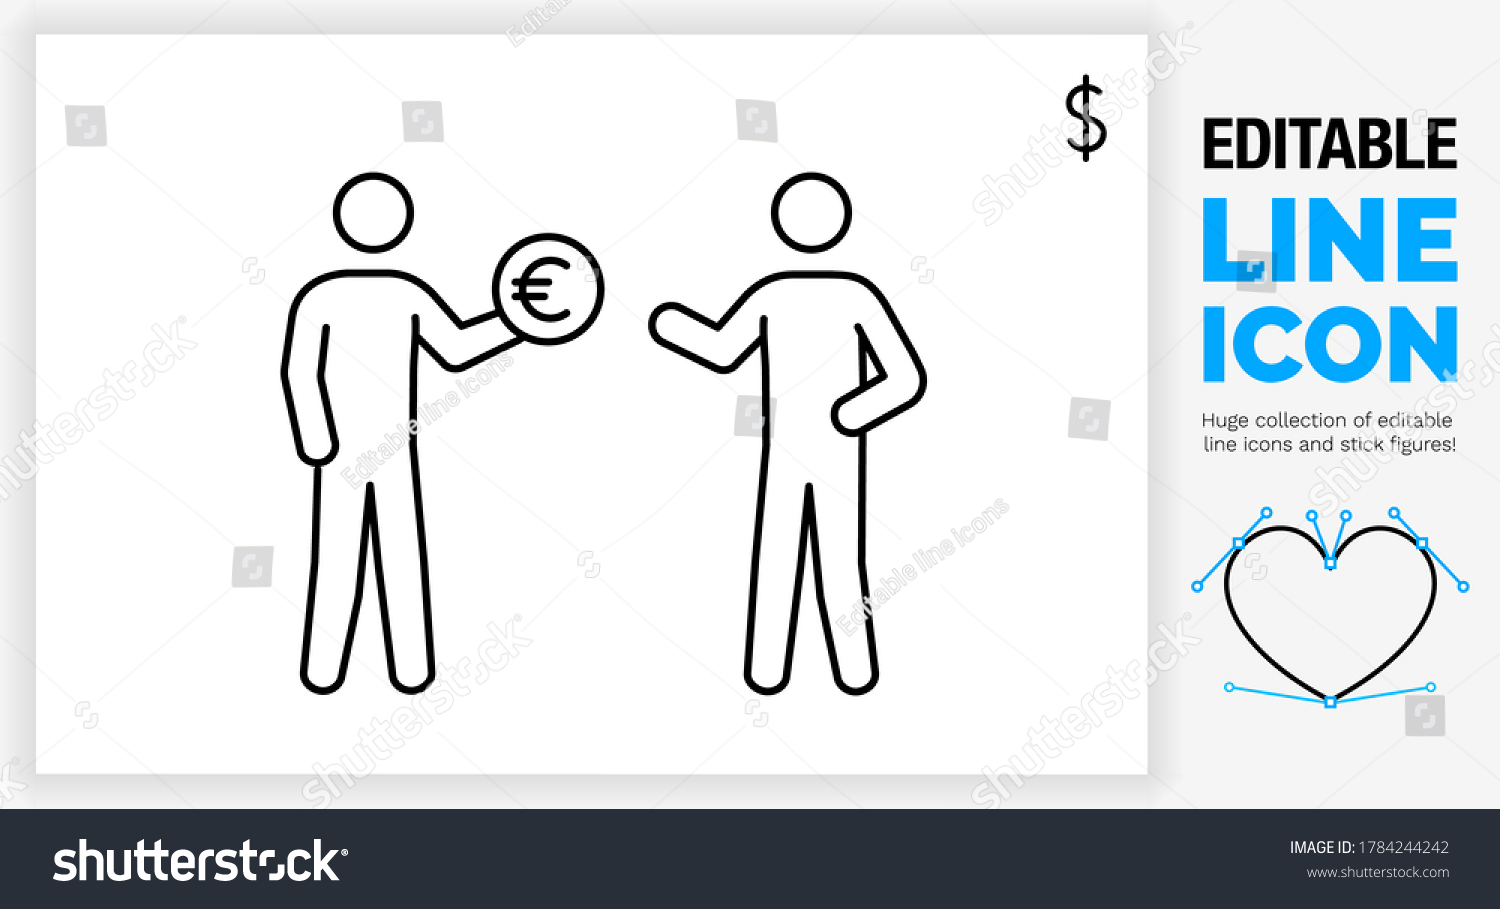 SVG of Editable line icon of two stick figure people standing in full body view giving or lending a money coin with a euro sign to a friend or business partner as a eps vector graphic in a black stroke svg